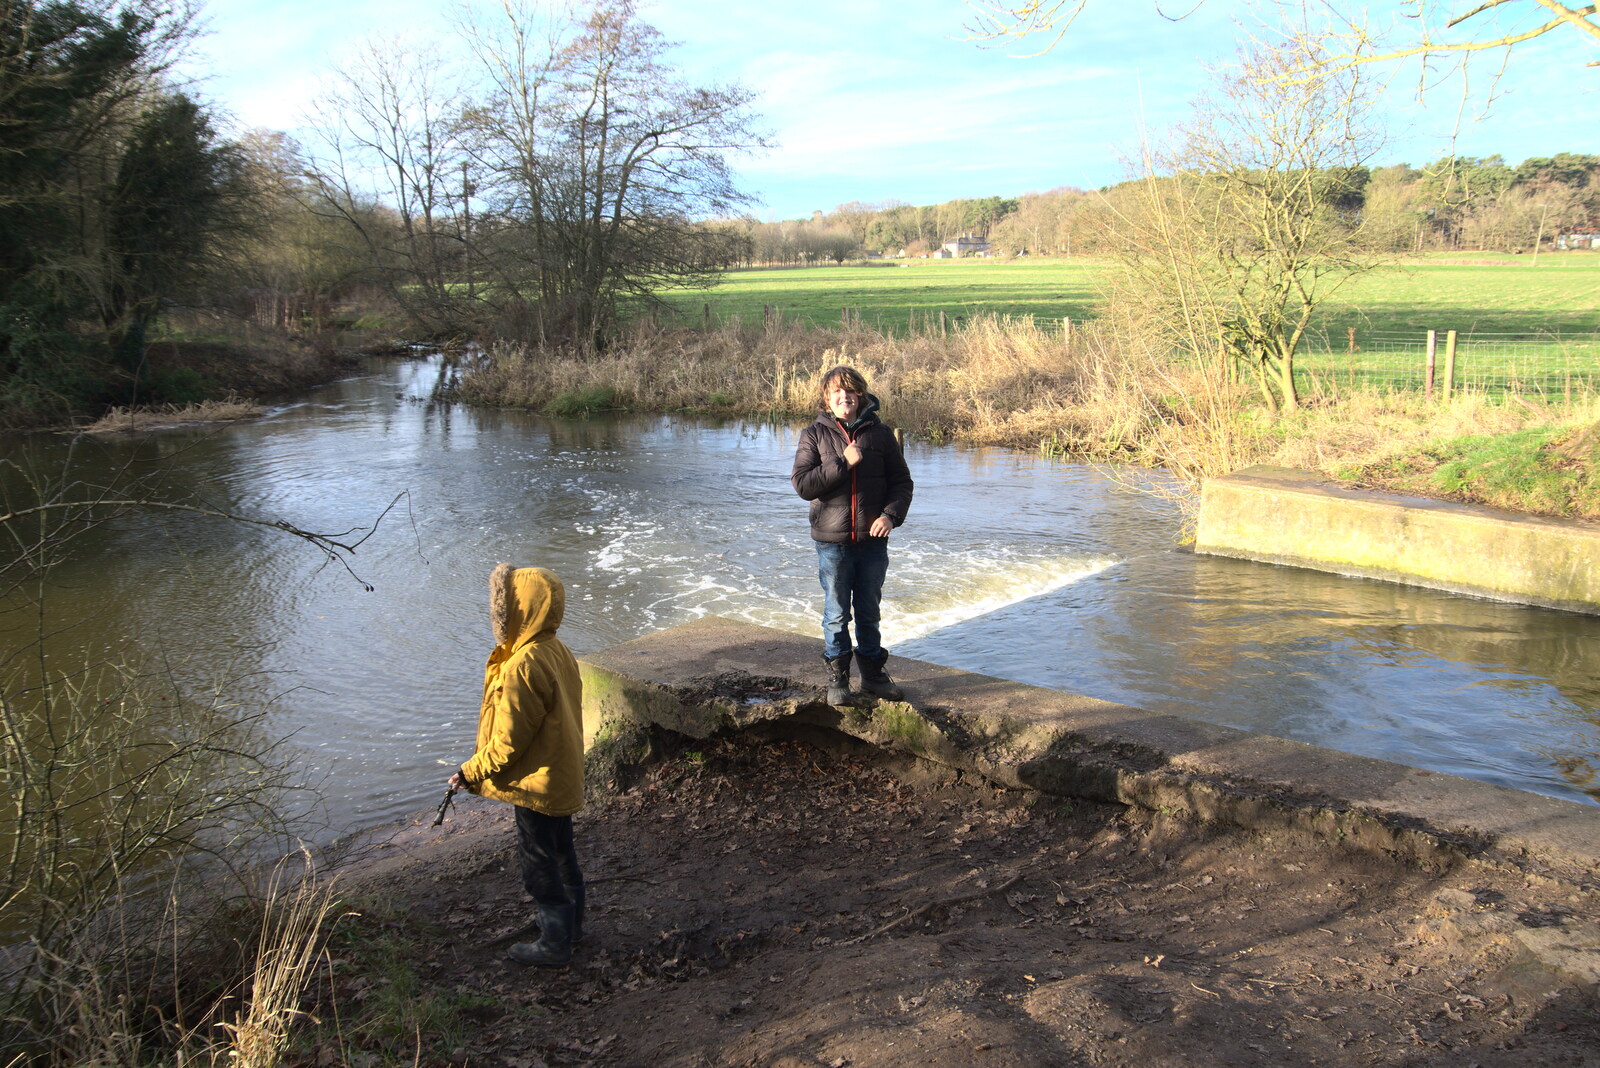 Harry and Fred hang around by the weir from A Walk Around Knettishall Heath, Thetford, Norfolk - 2nd January 2022